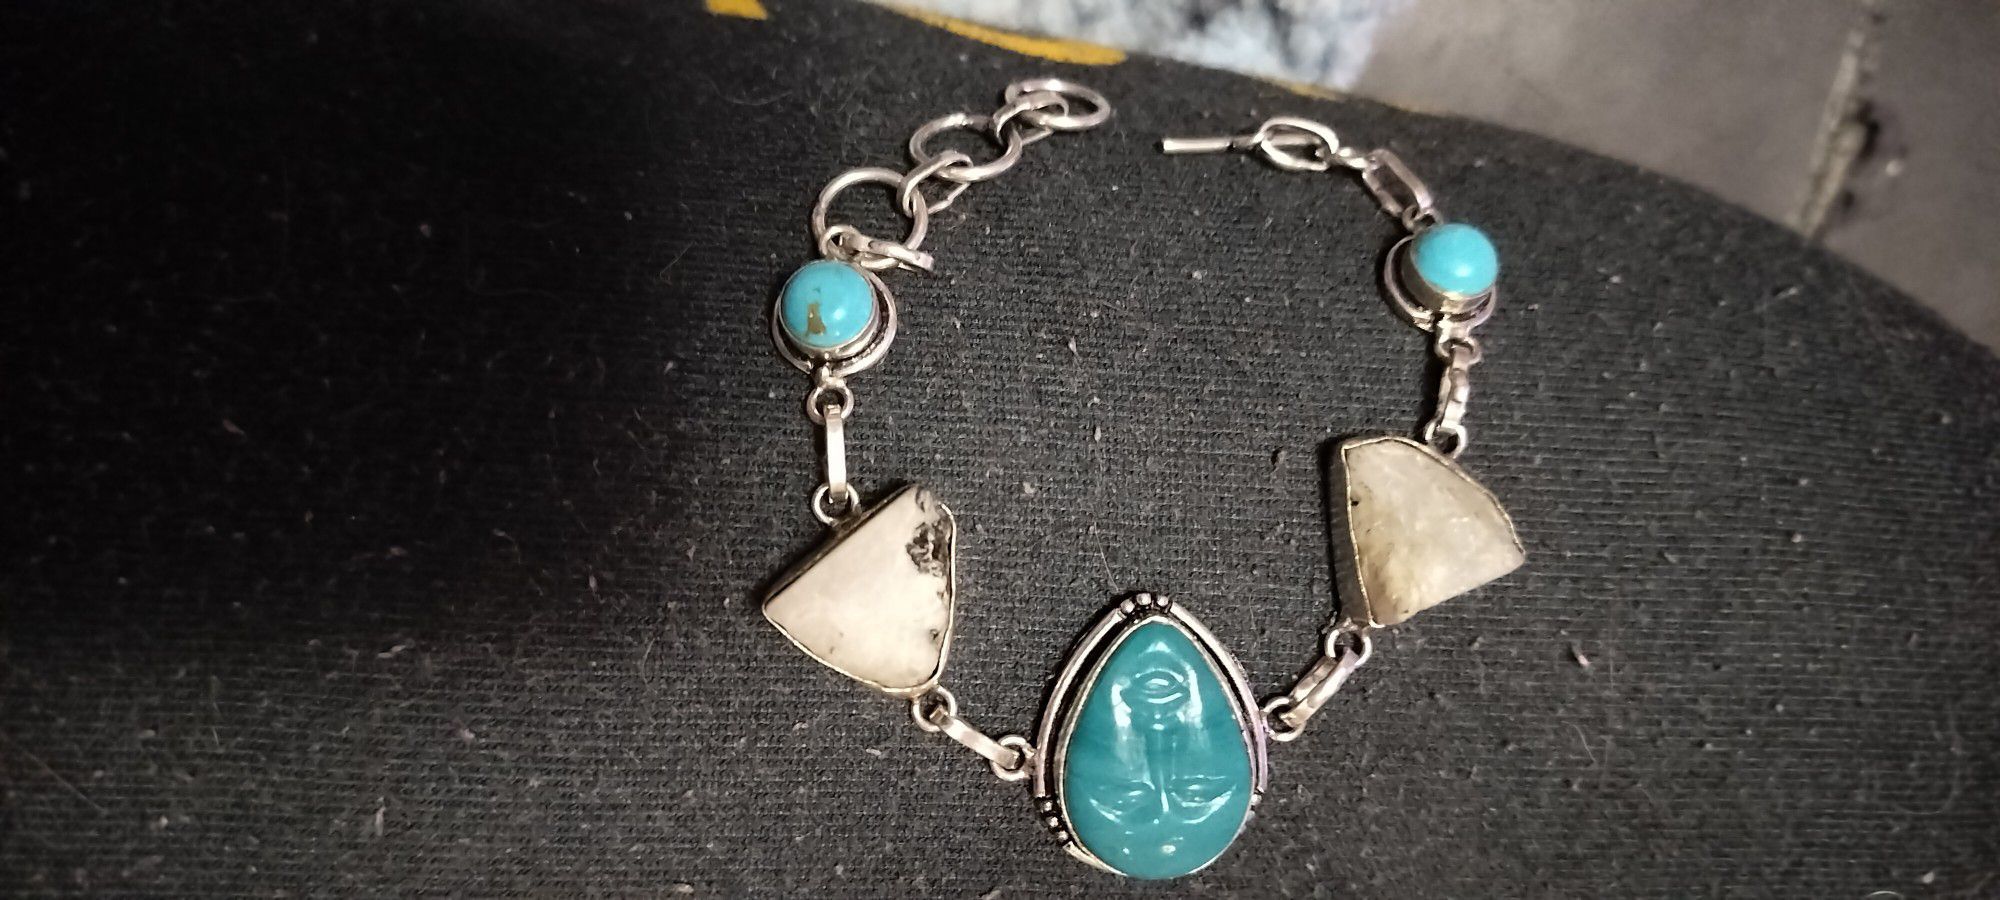 Gorgeous Moonstone And Turquoise Jade Silver Sautered Bracelet